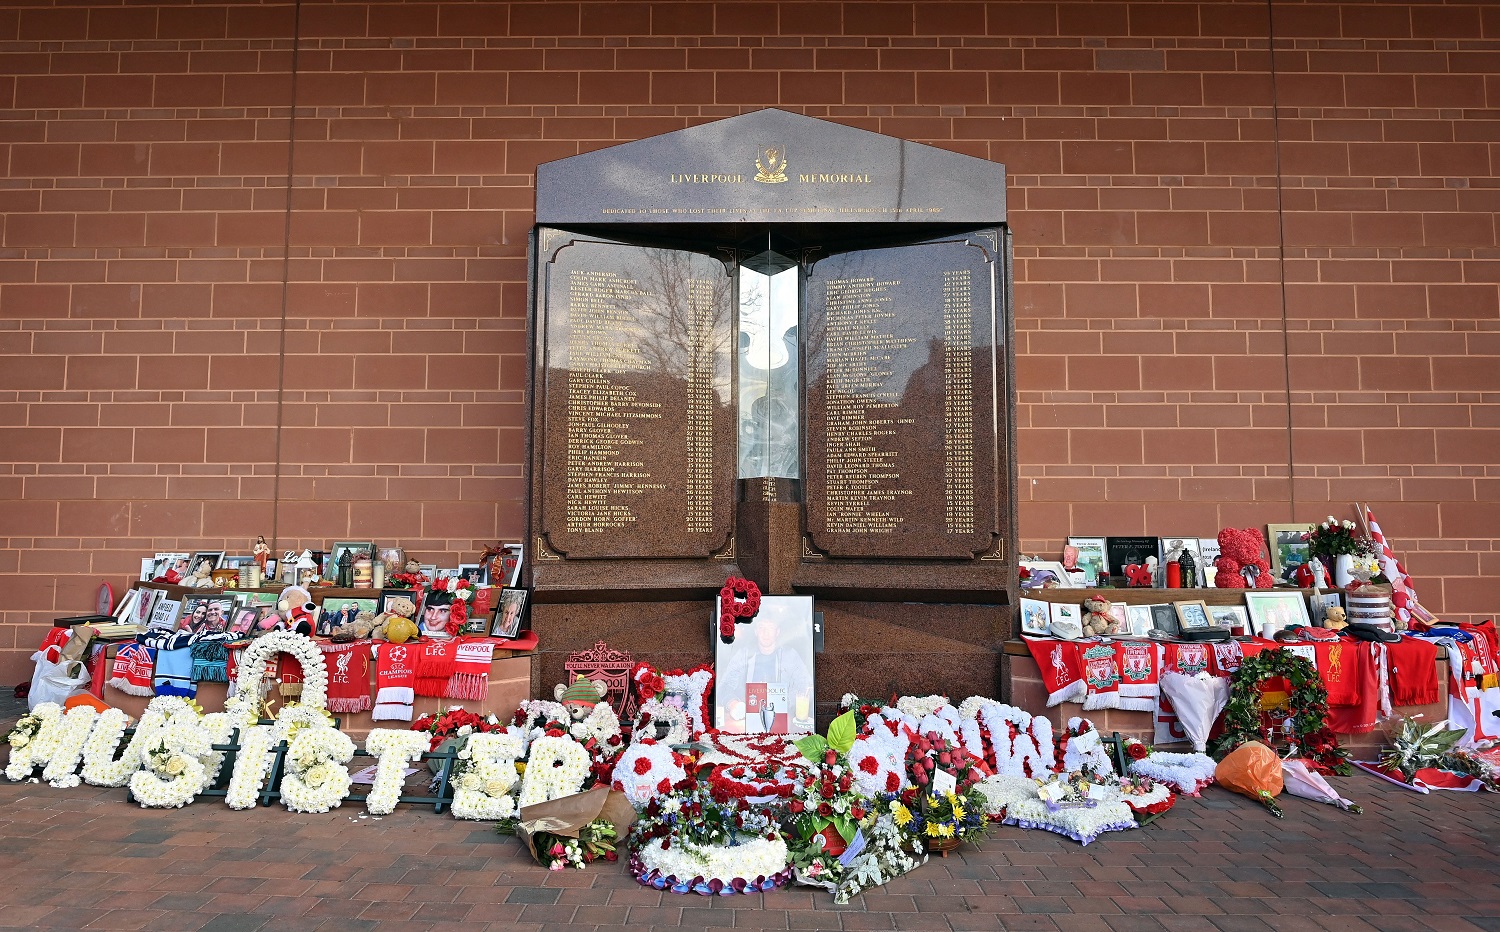 Flowers, shirts, and photos surround the eternal flame of the Hillsborough memorial at Anfield in Liverpool.